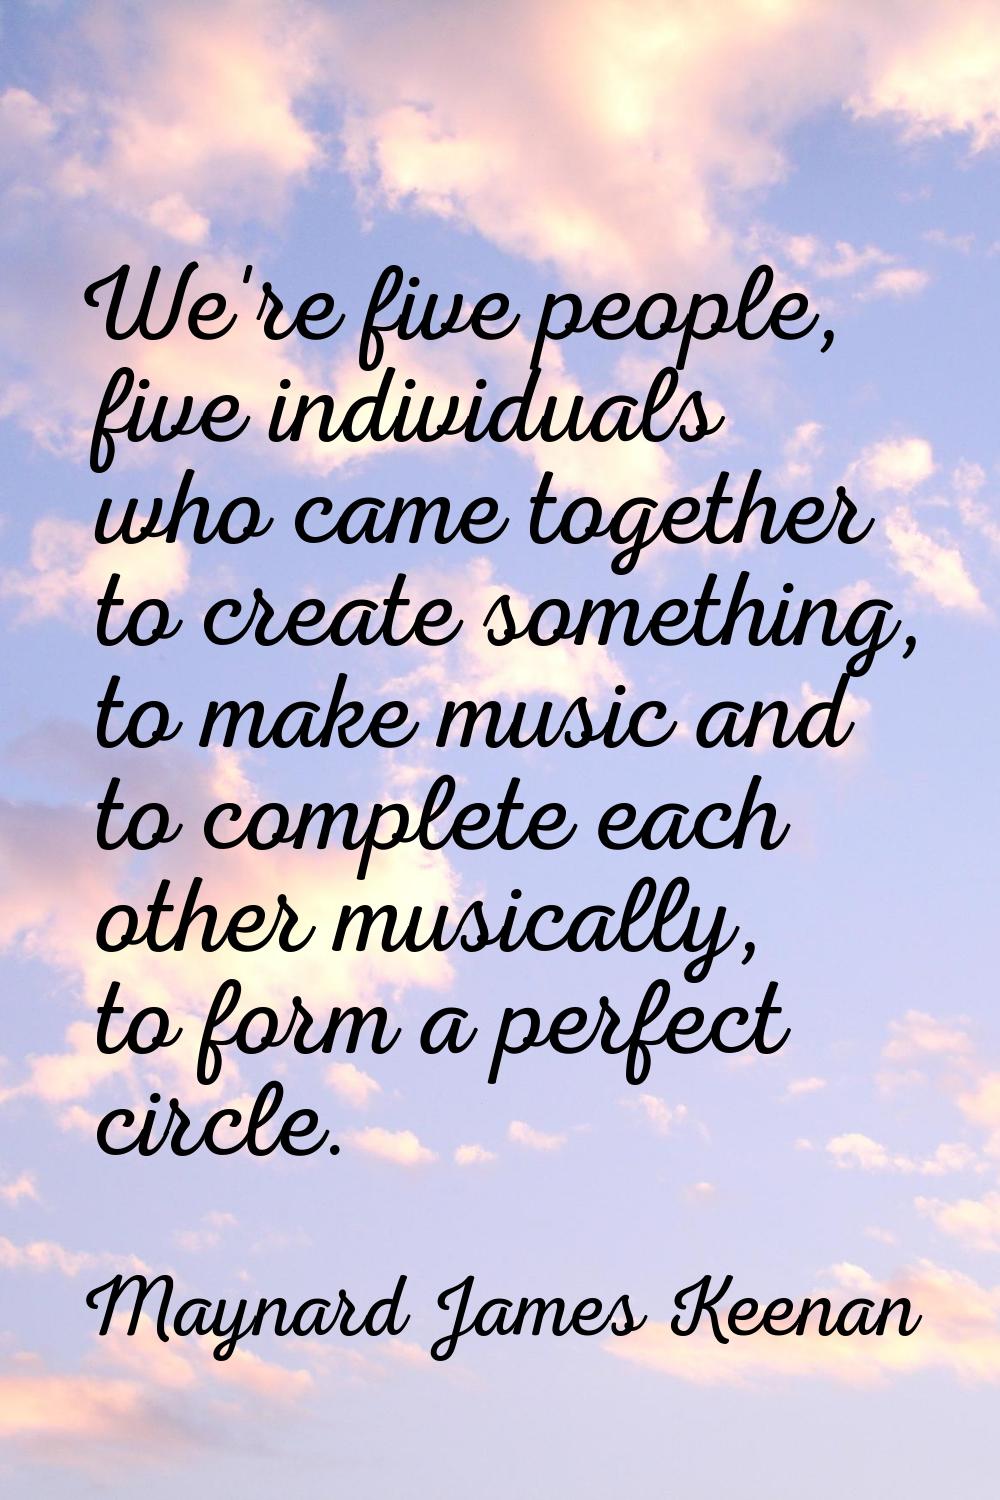 We're five people, five individuals who came together to create something, to make music and to com